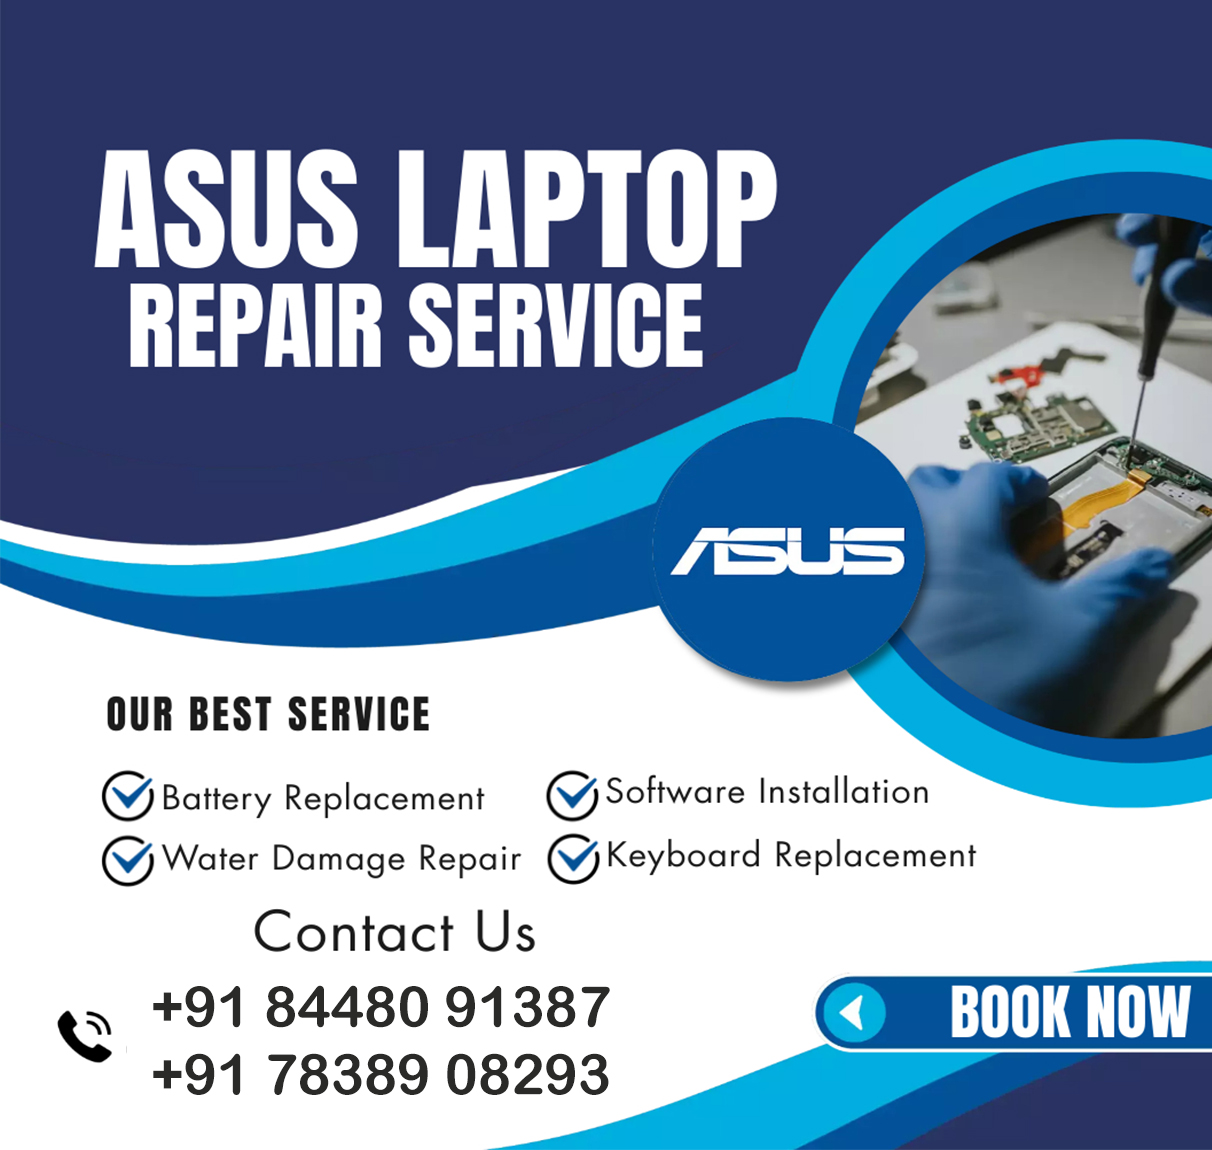 Asus Service Center Swargate in Pune